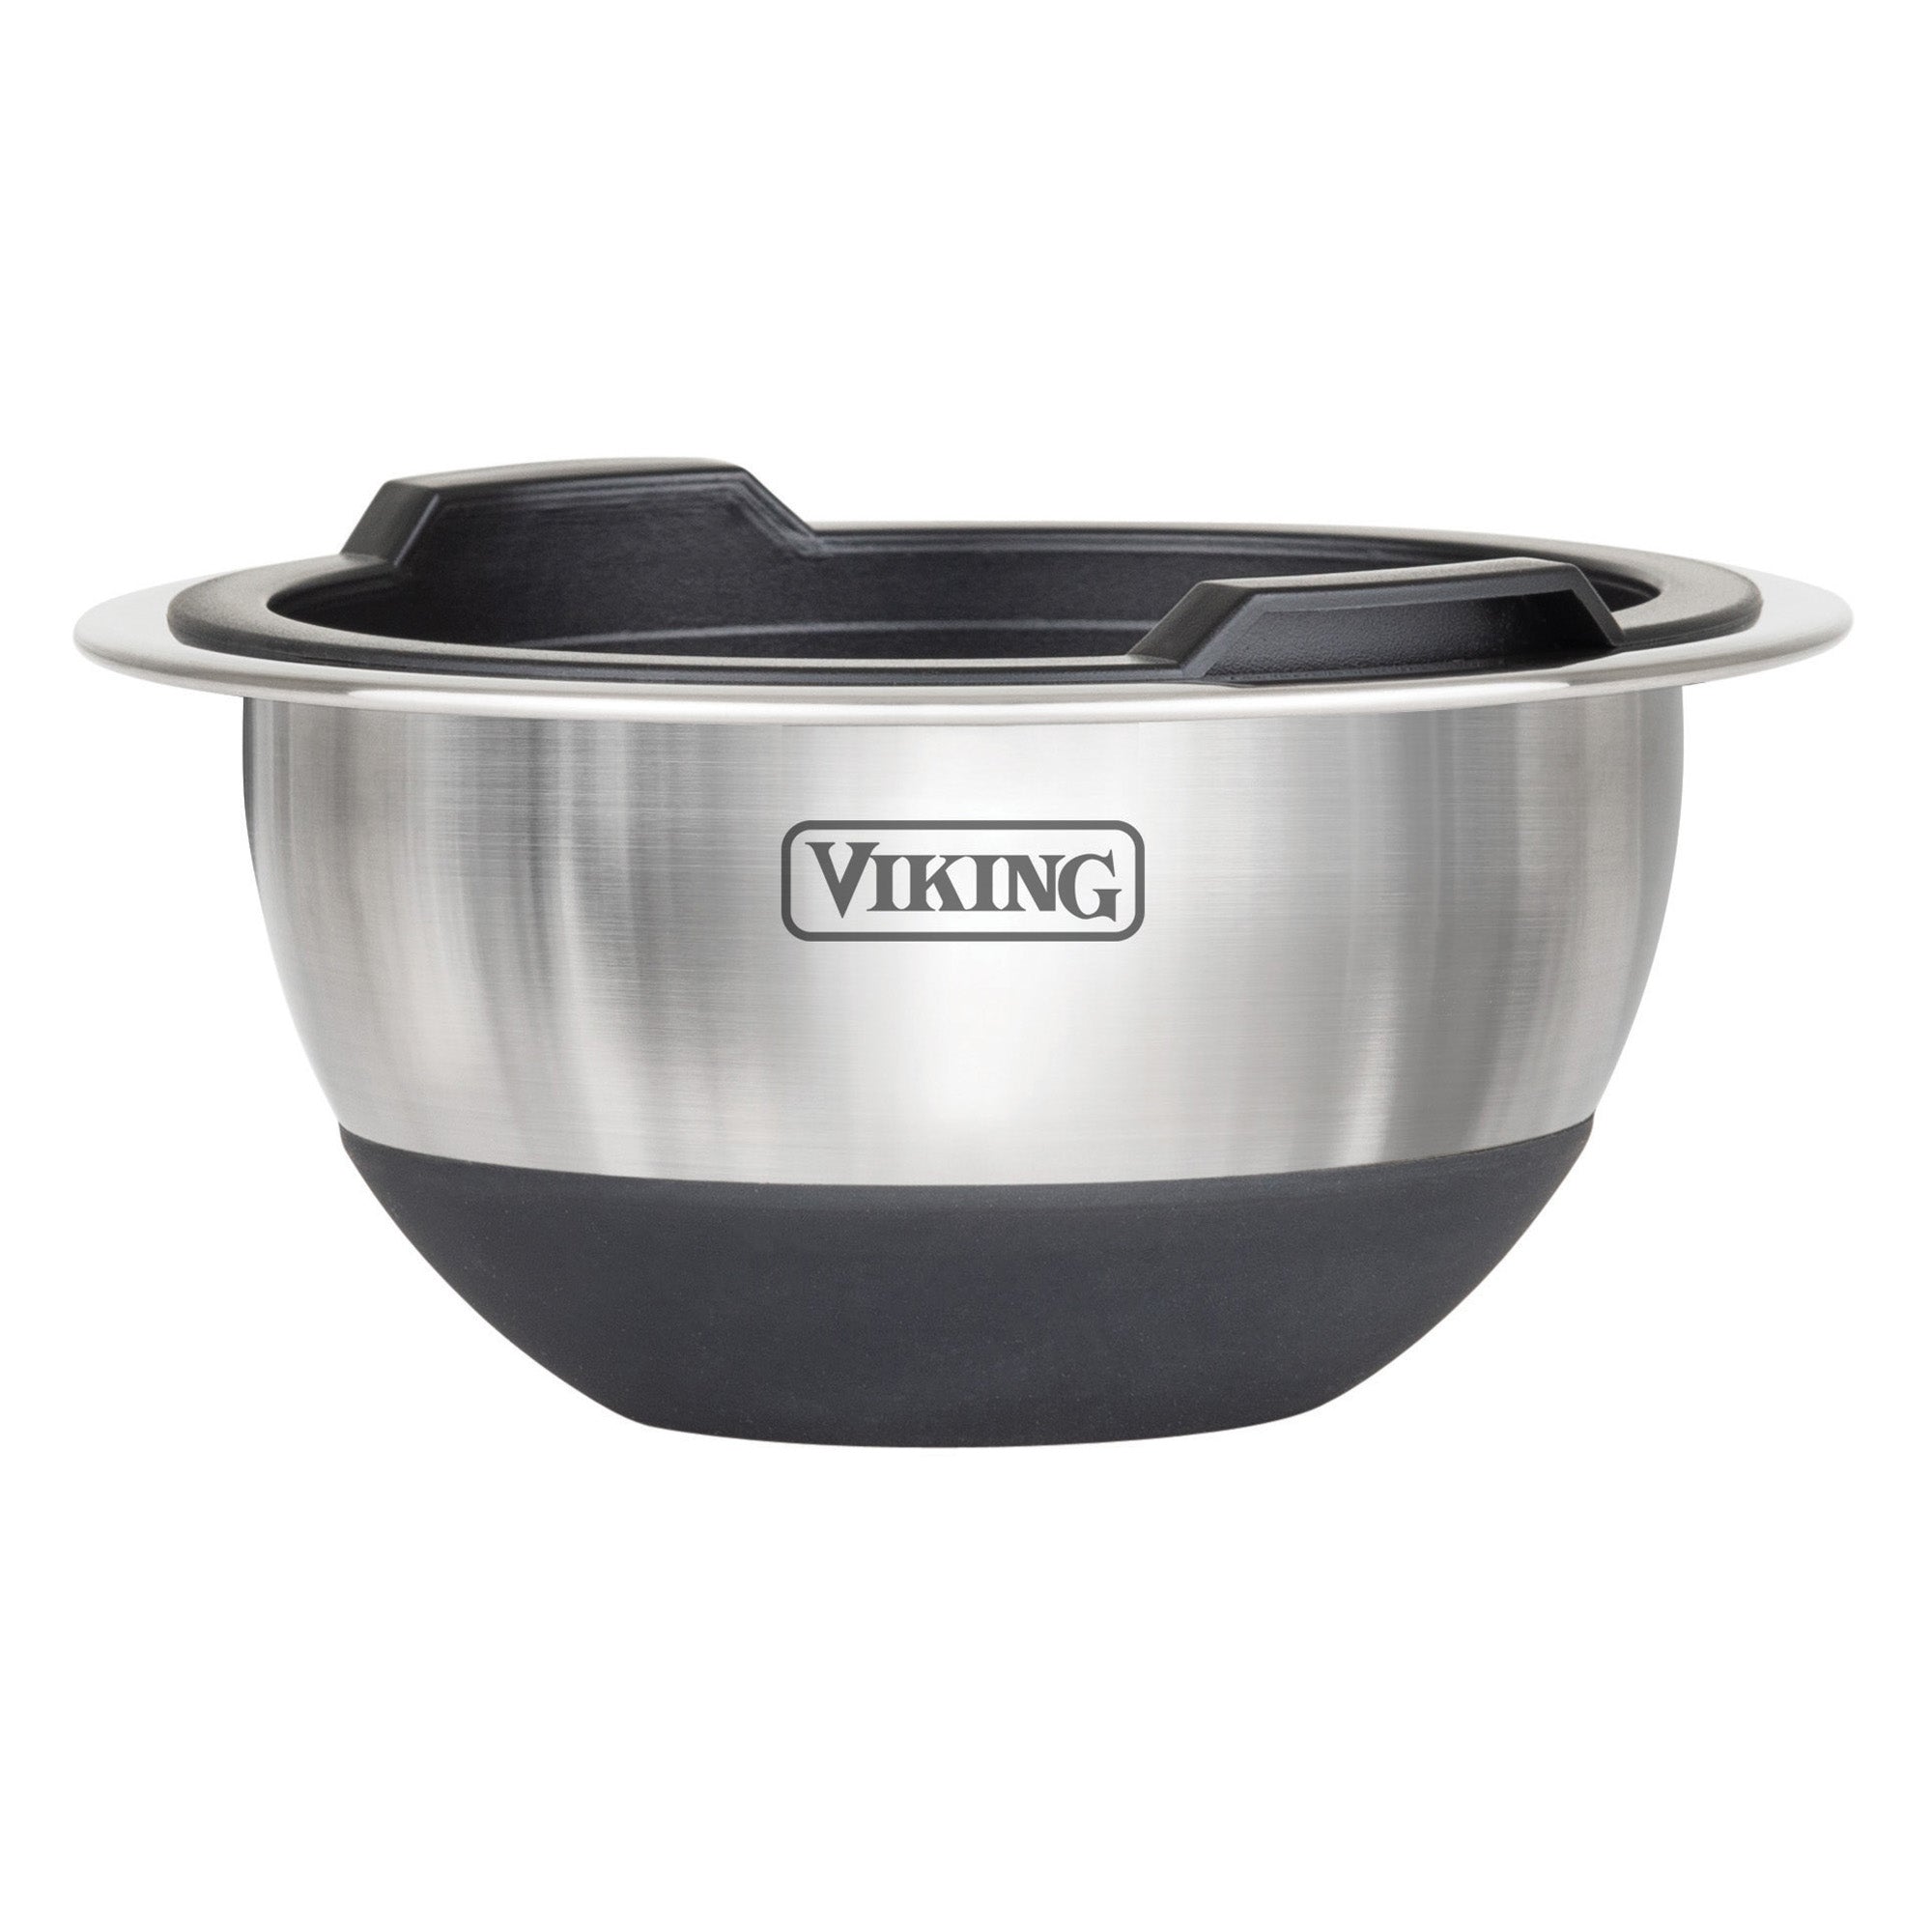 Viking 8-Piece Stainless Steel Mixing Bowl Set with Lids, Black